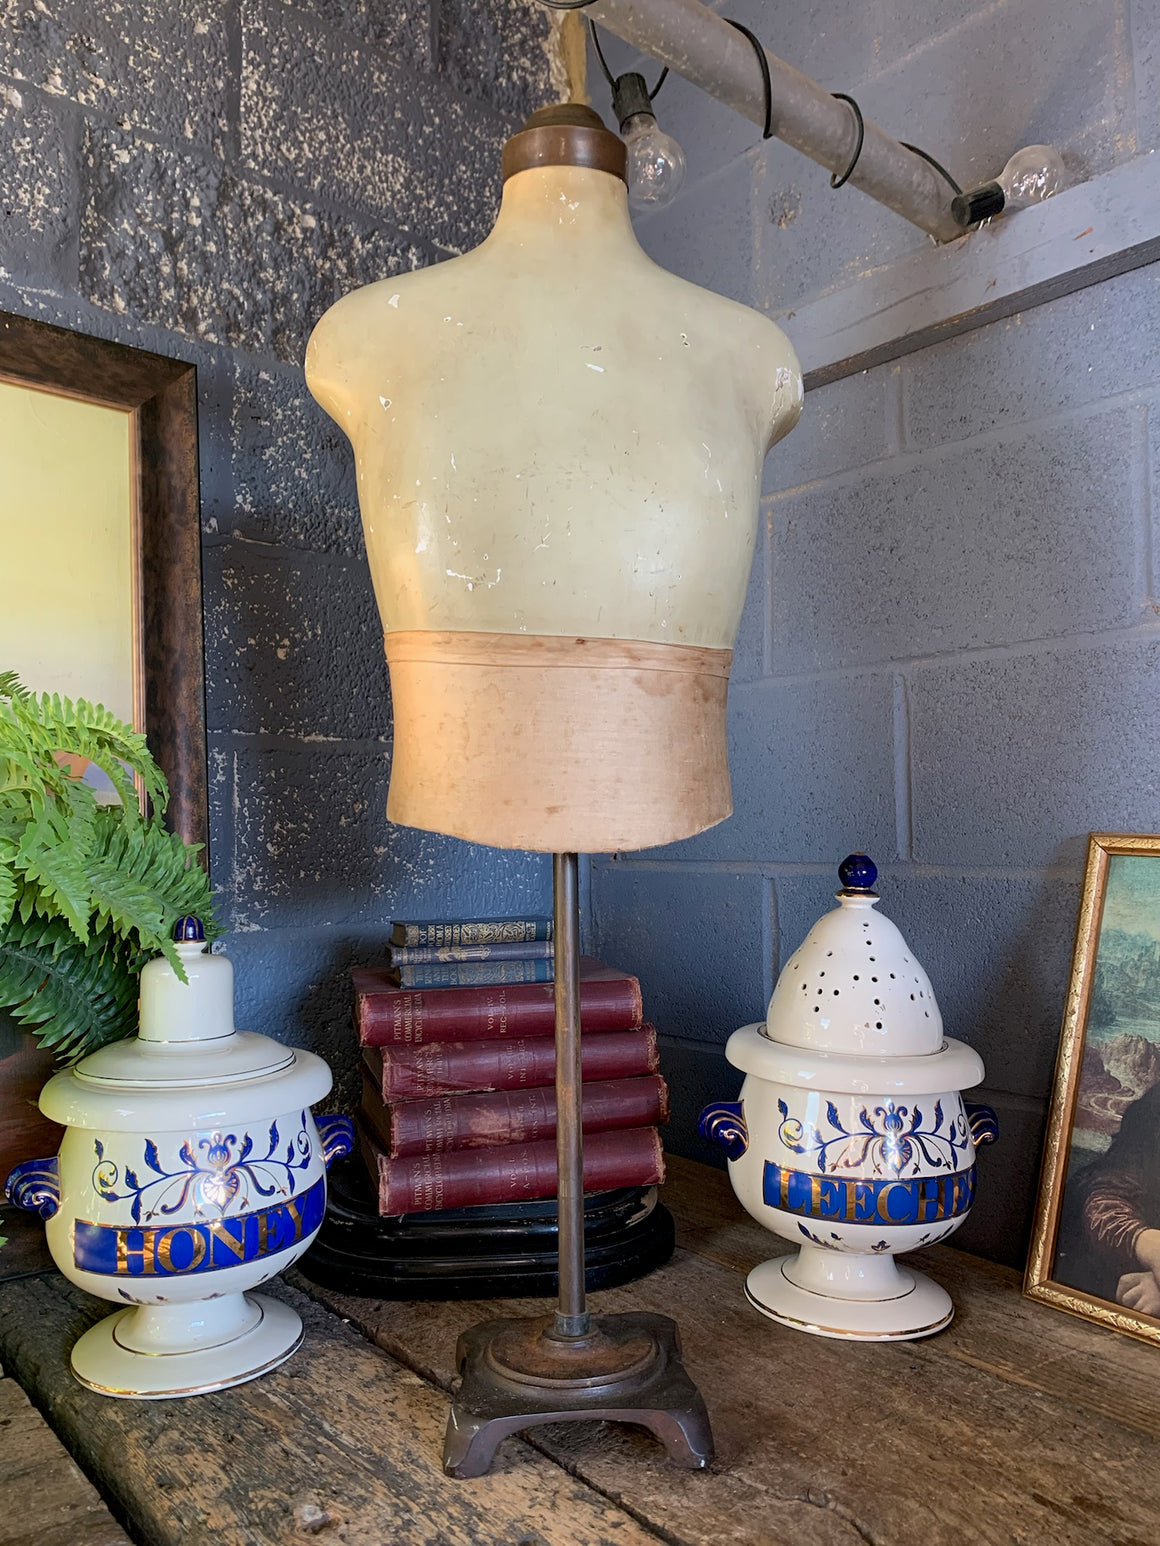 An adult male mannequin shop display model on cast iron base